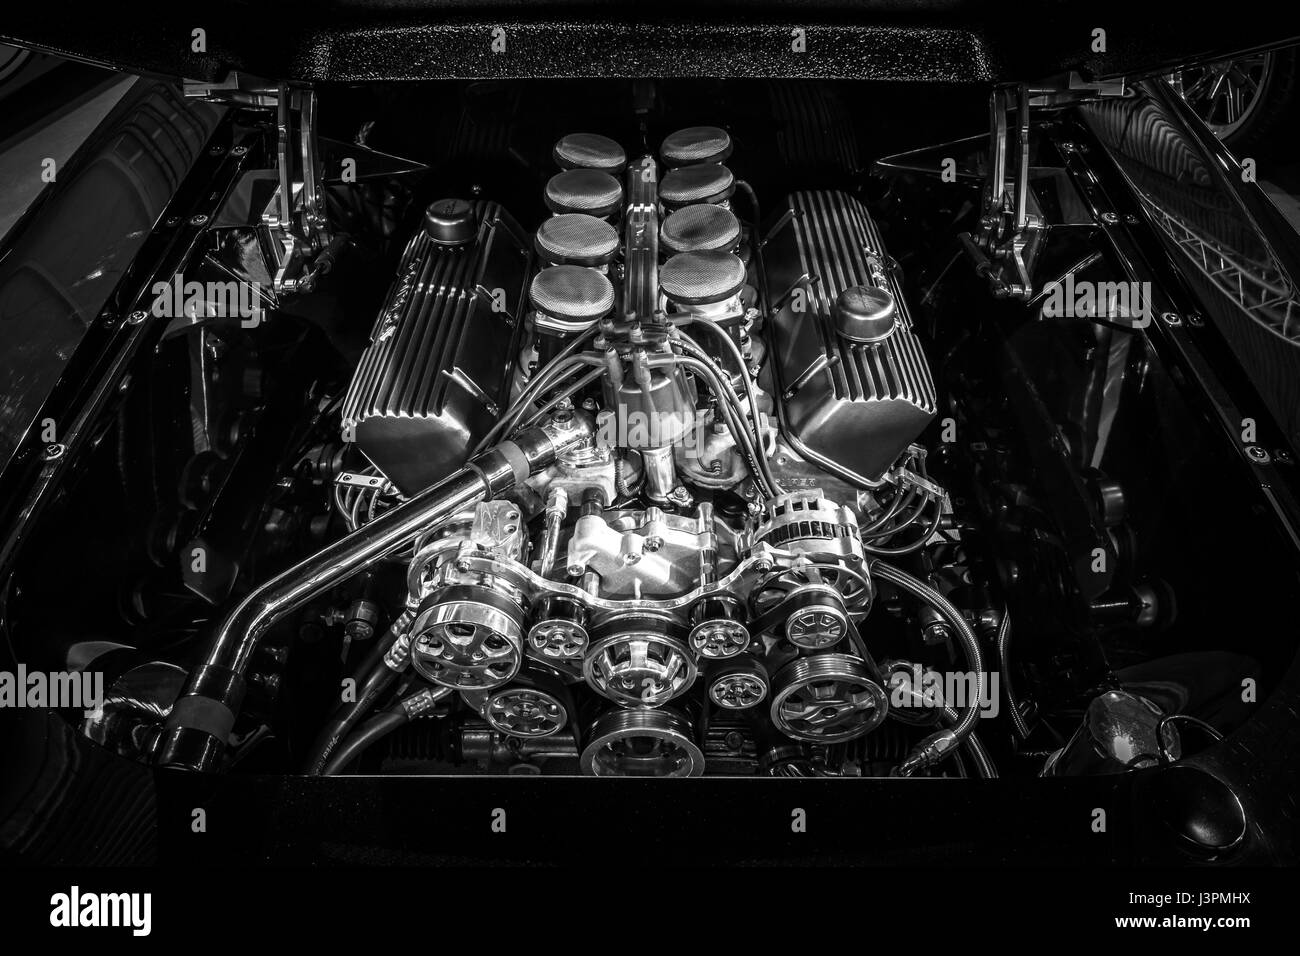 STUTTGART, GERMANY - MARCH 03, 2017: The fuel injected 460 big block the Ford engine (550 HP, 7,5L) of the Ford Mustang, 1967. Black and white.  Europe's greatest classic car exhibition 'RETRO CLASSICS' Stock Photo